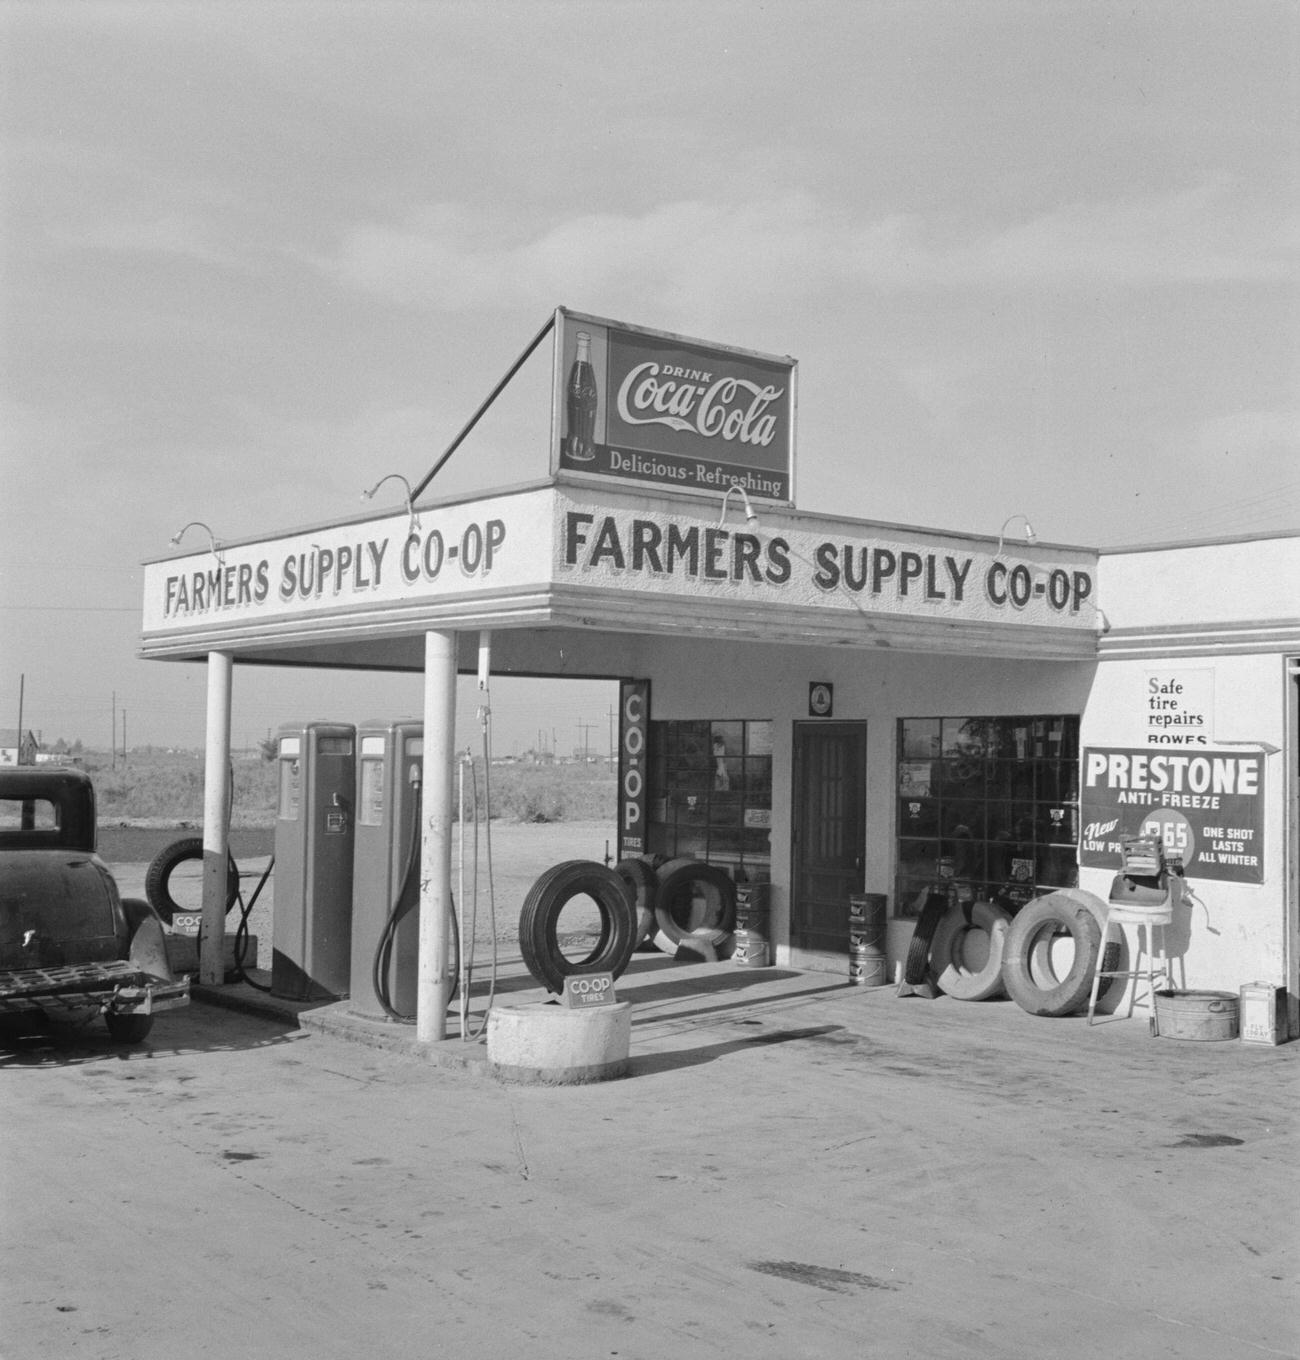 Farmers' Supply Co-op in Nyssa, Oregon with Safe Tire Repairs Sign